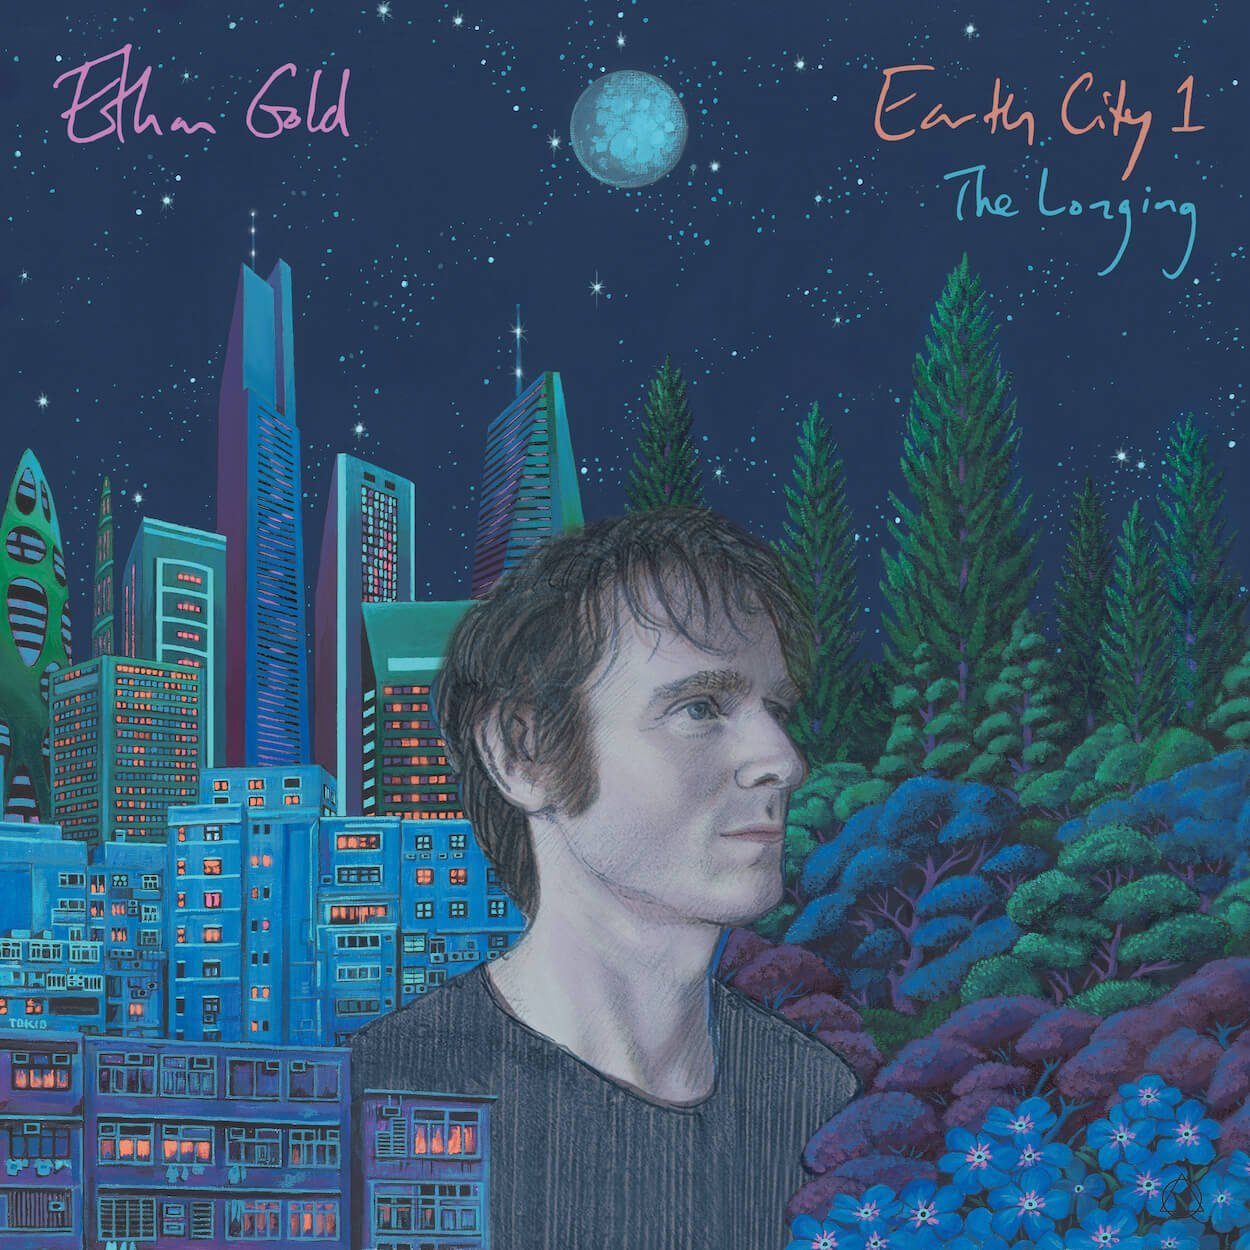 Earth City 1 The Longing Album by Ethan Gold Top Indie Artist 2021